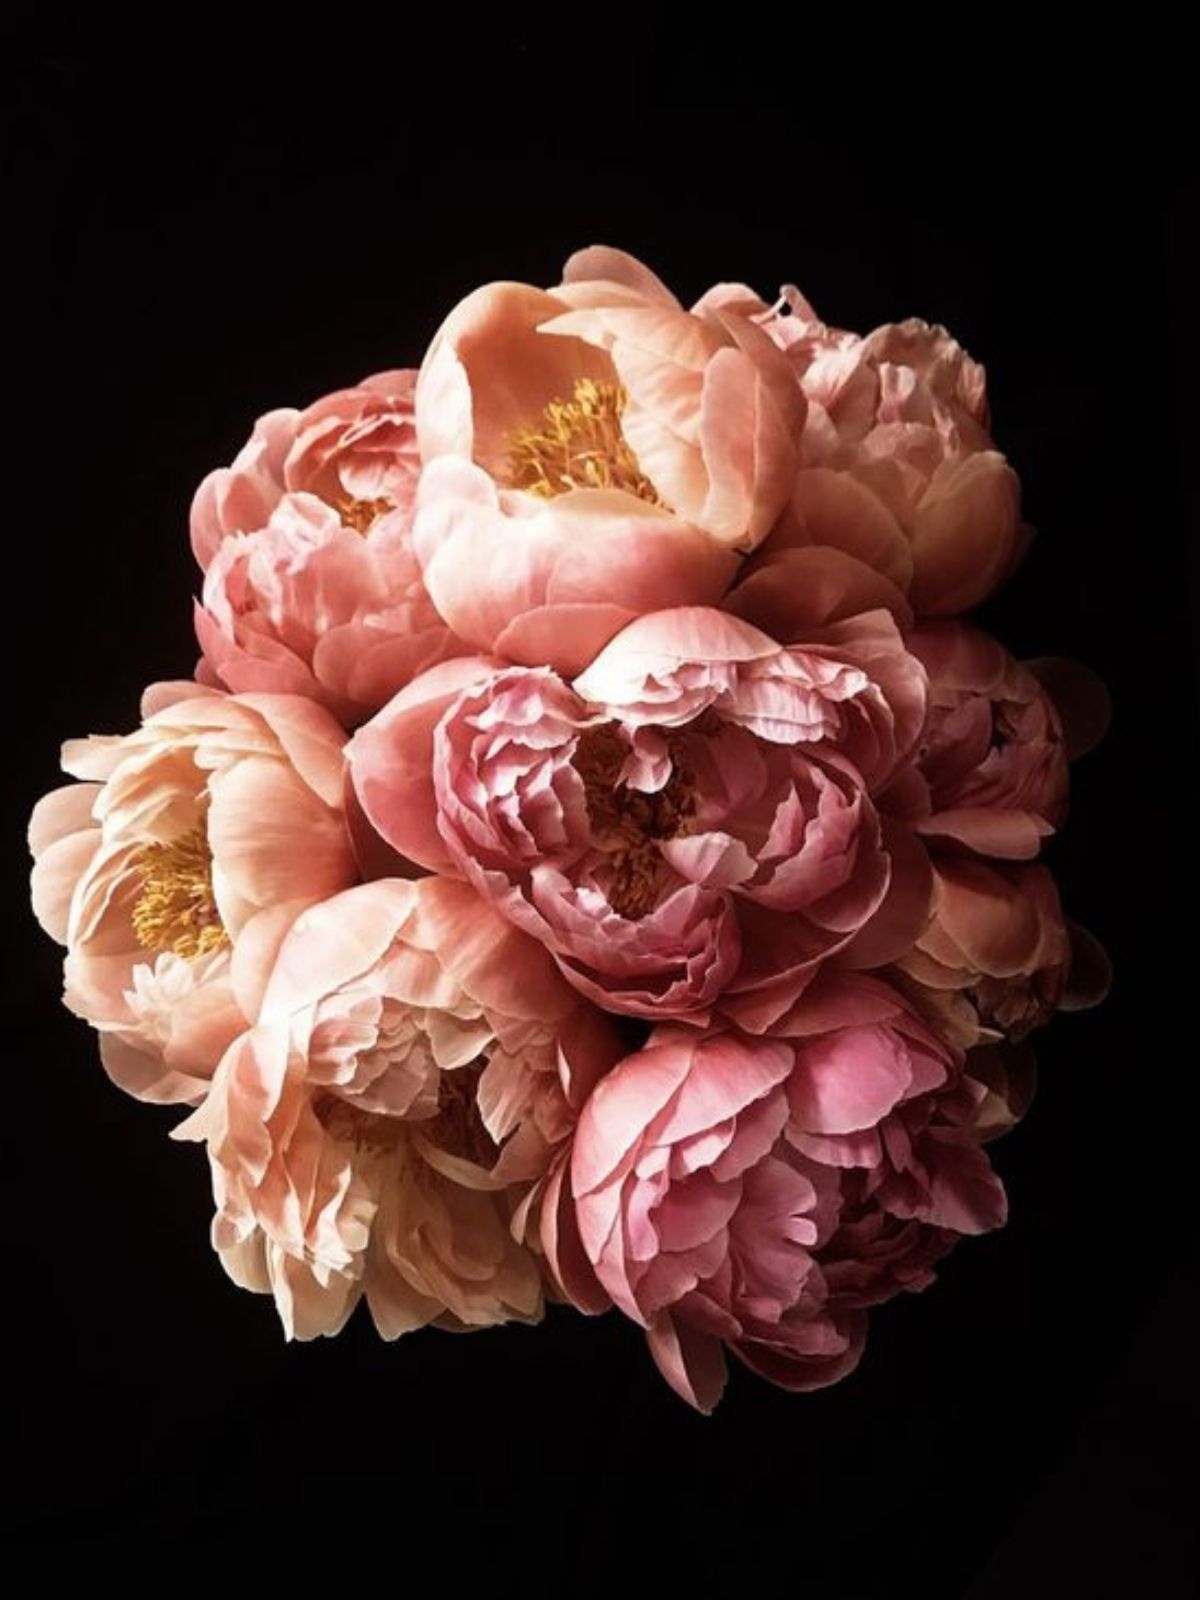 Everything You Want To Know About Peonies - grouped peonies - gentl and hyers photography - on thursd